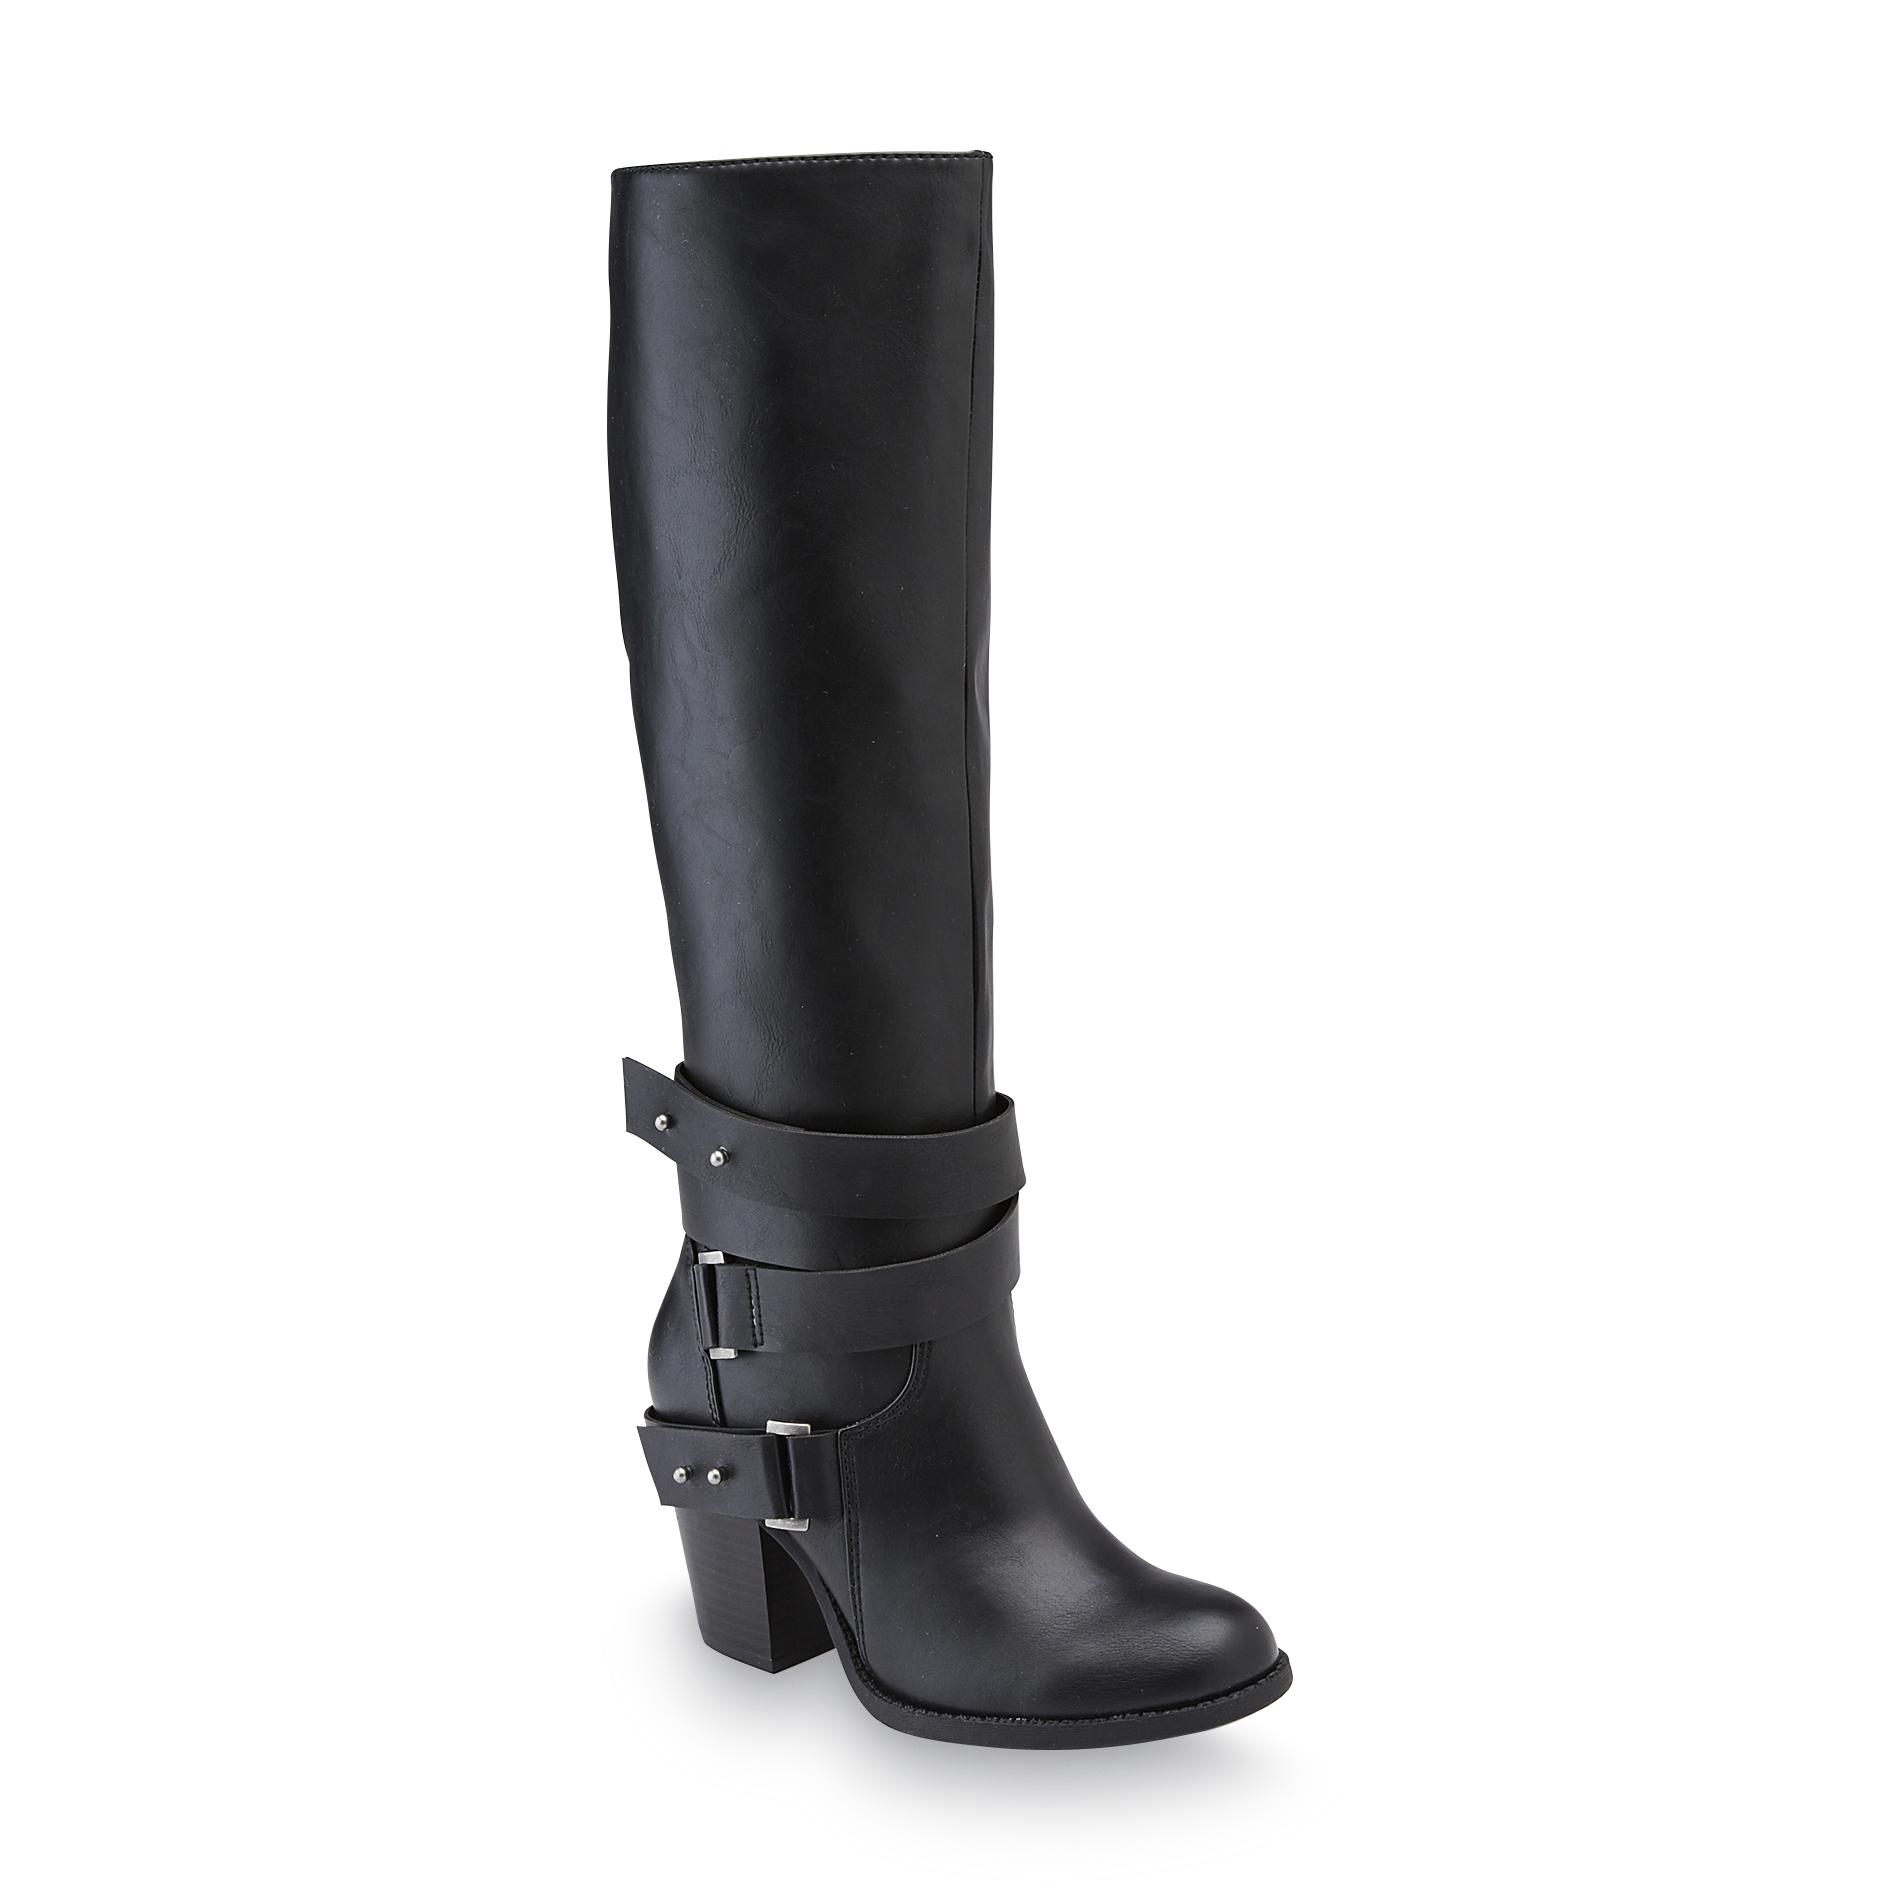 Bongo Women’s Walker Black Tall Boots Only $20.49 After Code and SYWR Points!